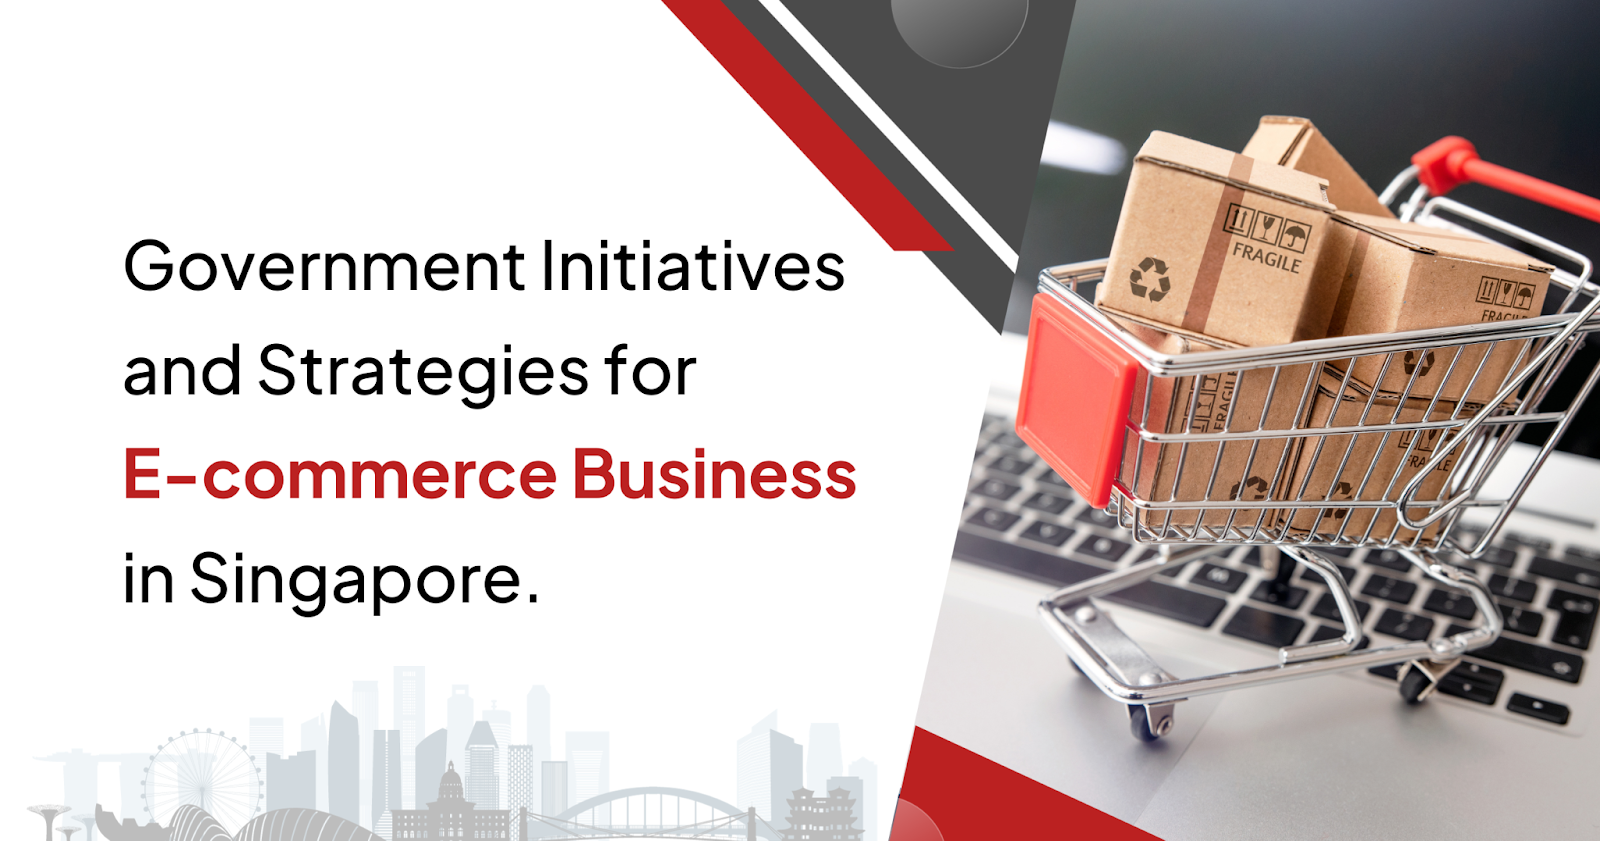 Government Initiatives and Strategies for E-commerce Business in Singapore